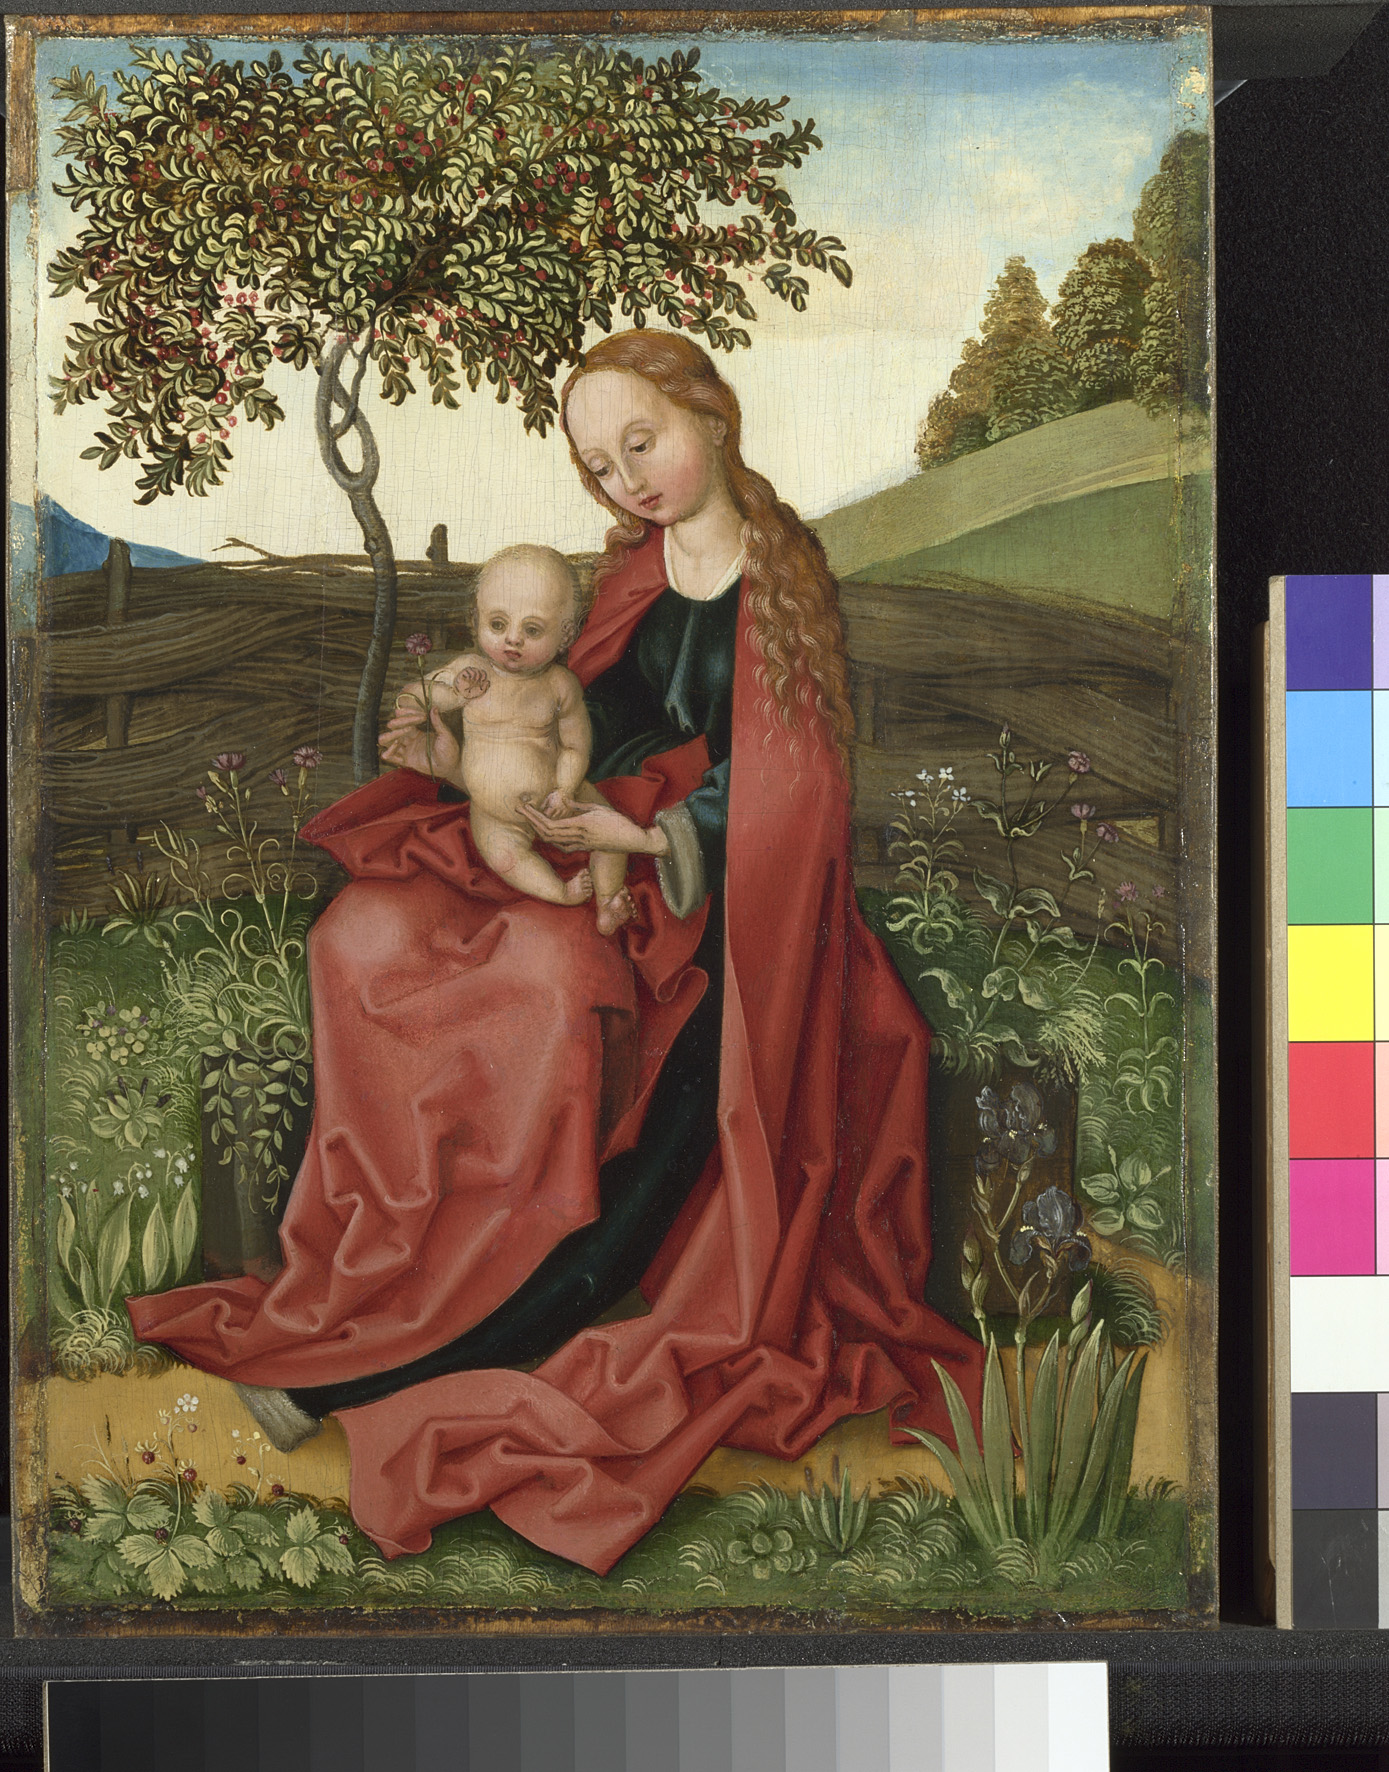 Martin Schongauer (active 1469; died 1491)
The Virgin and Child in a Garden, 1469 91
Oil on lime
The National Gallery, London
© The National Gallery, London
